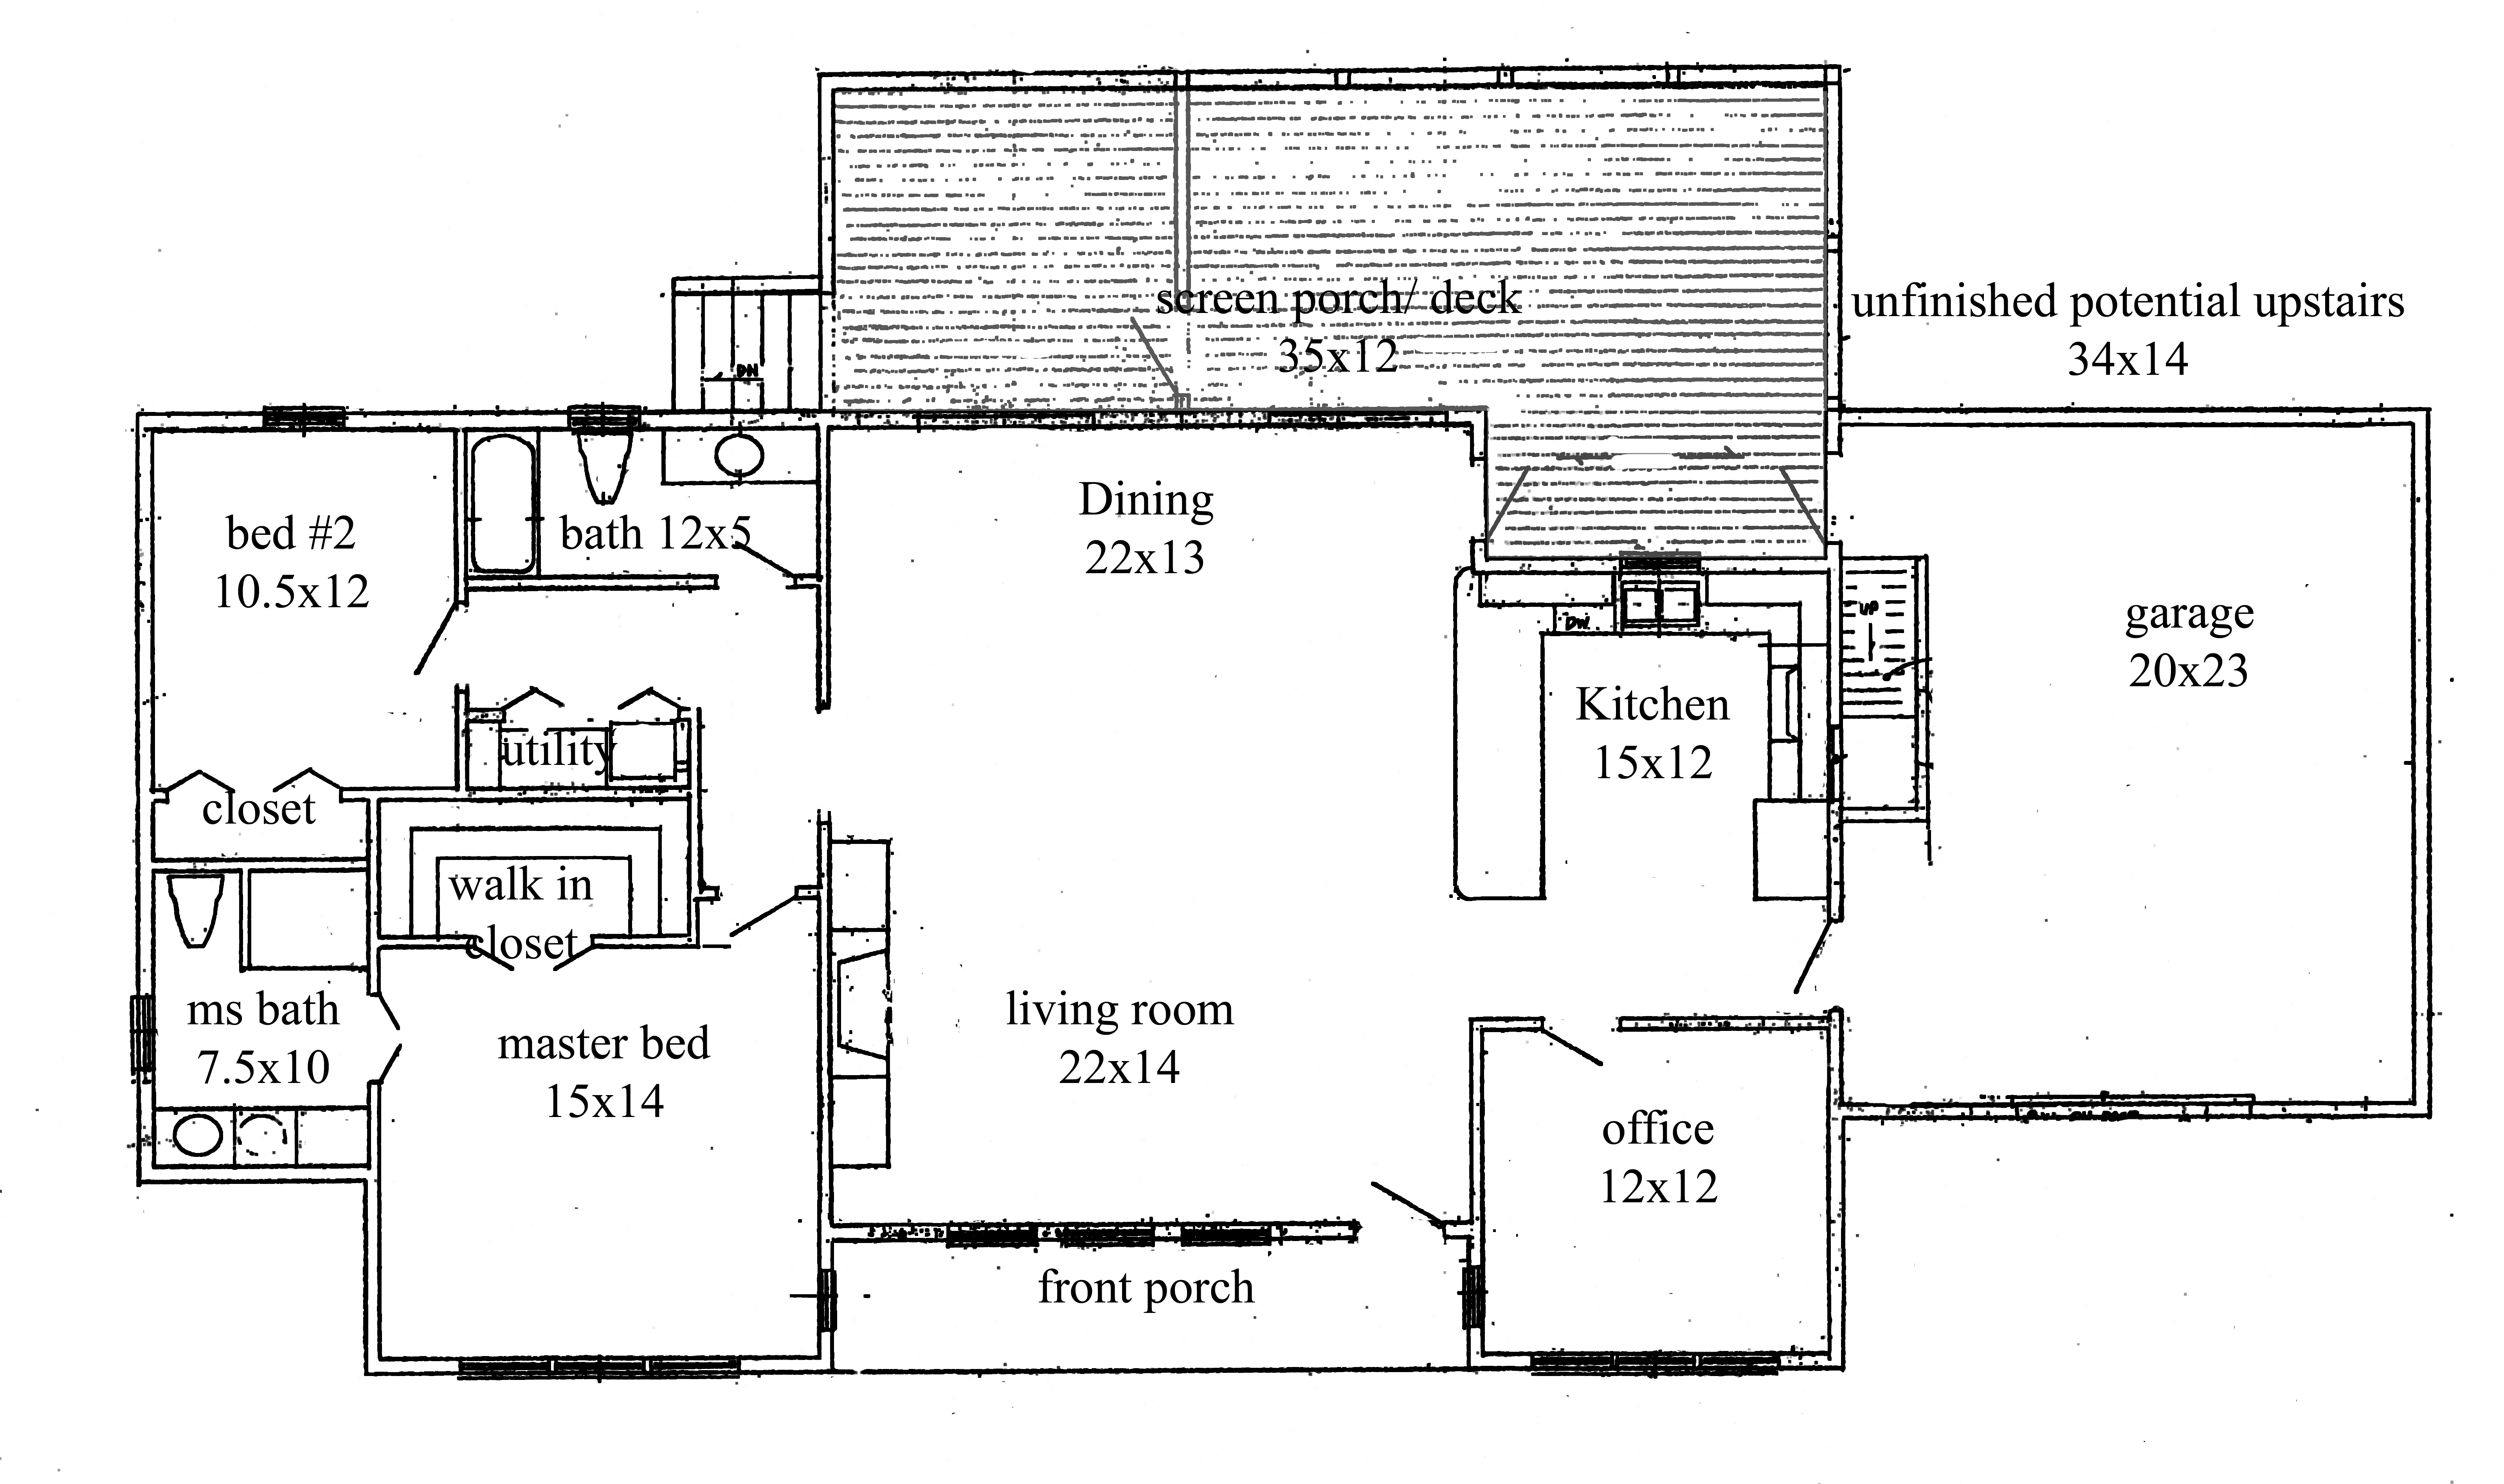 Greenwood Construction house plans 3